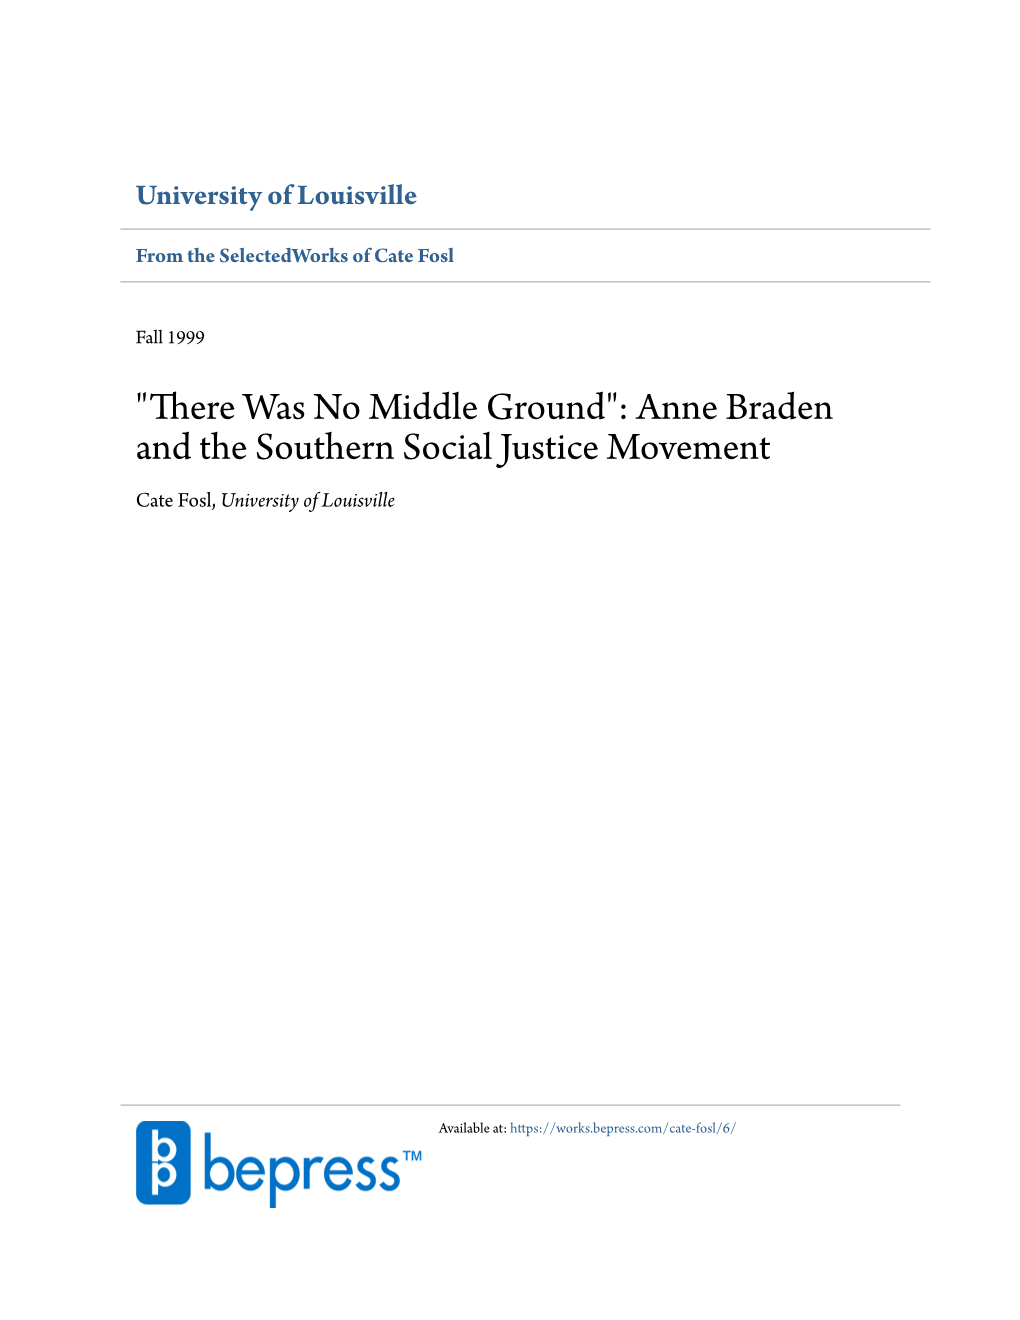 "There Was No Middle Ground": Anne Braden and the Southern Social Justice Movement Cate Fosl, University of Louisville